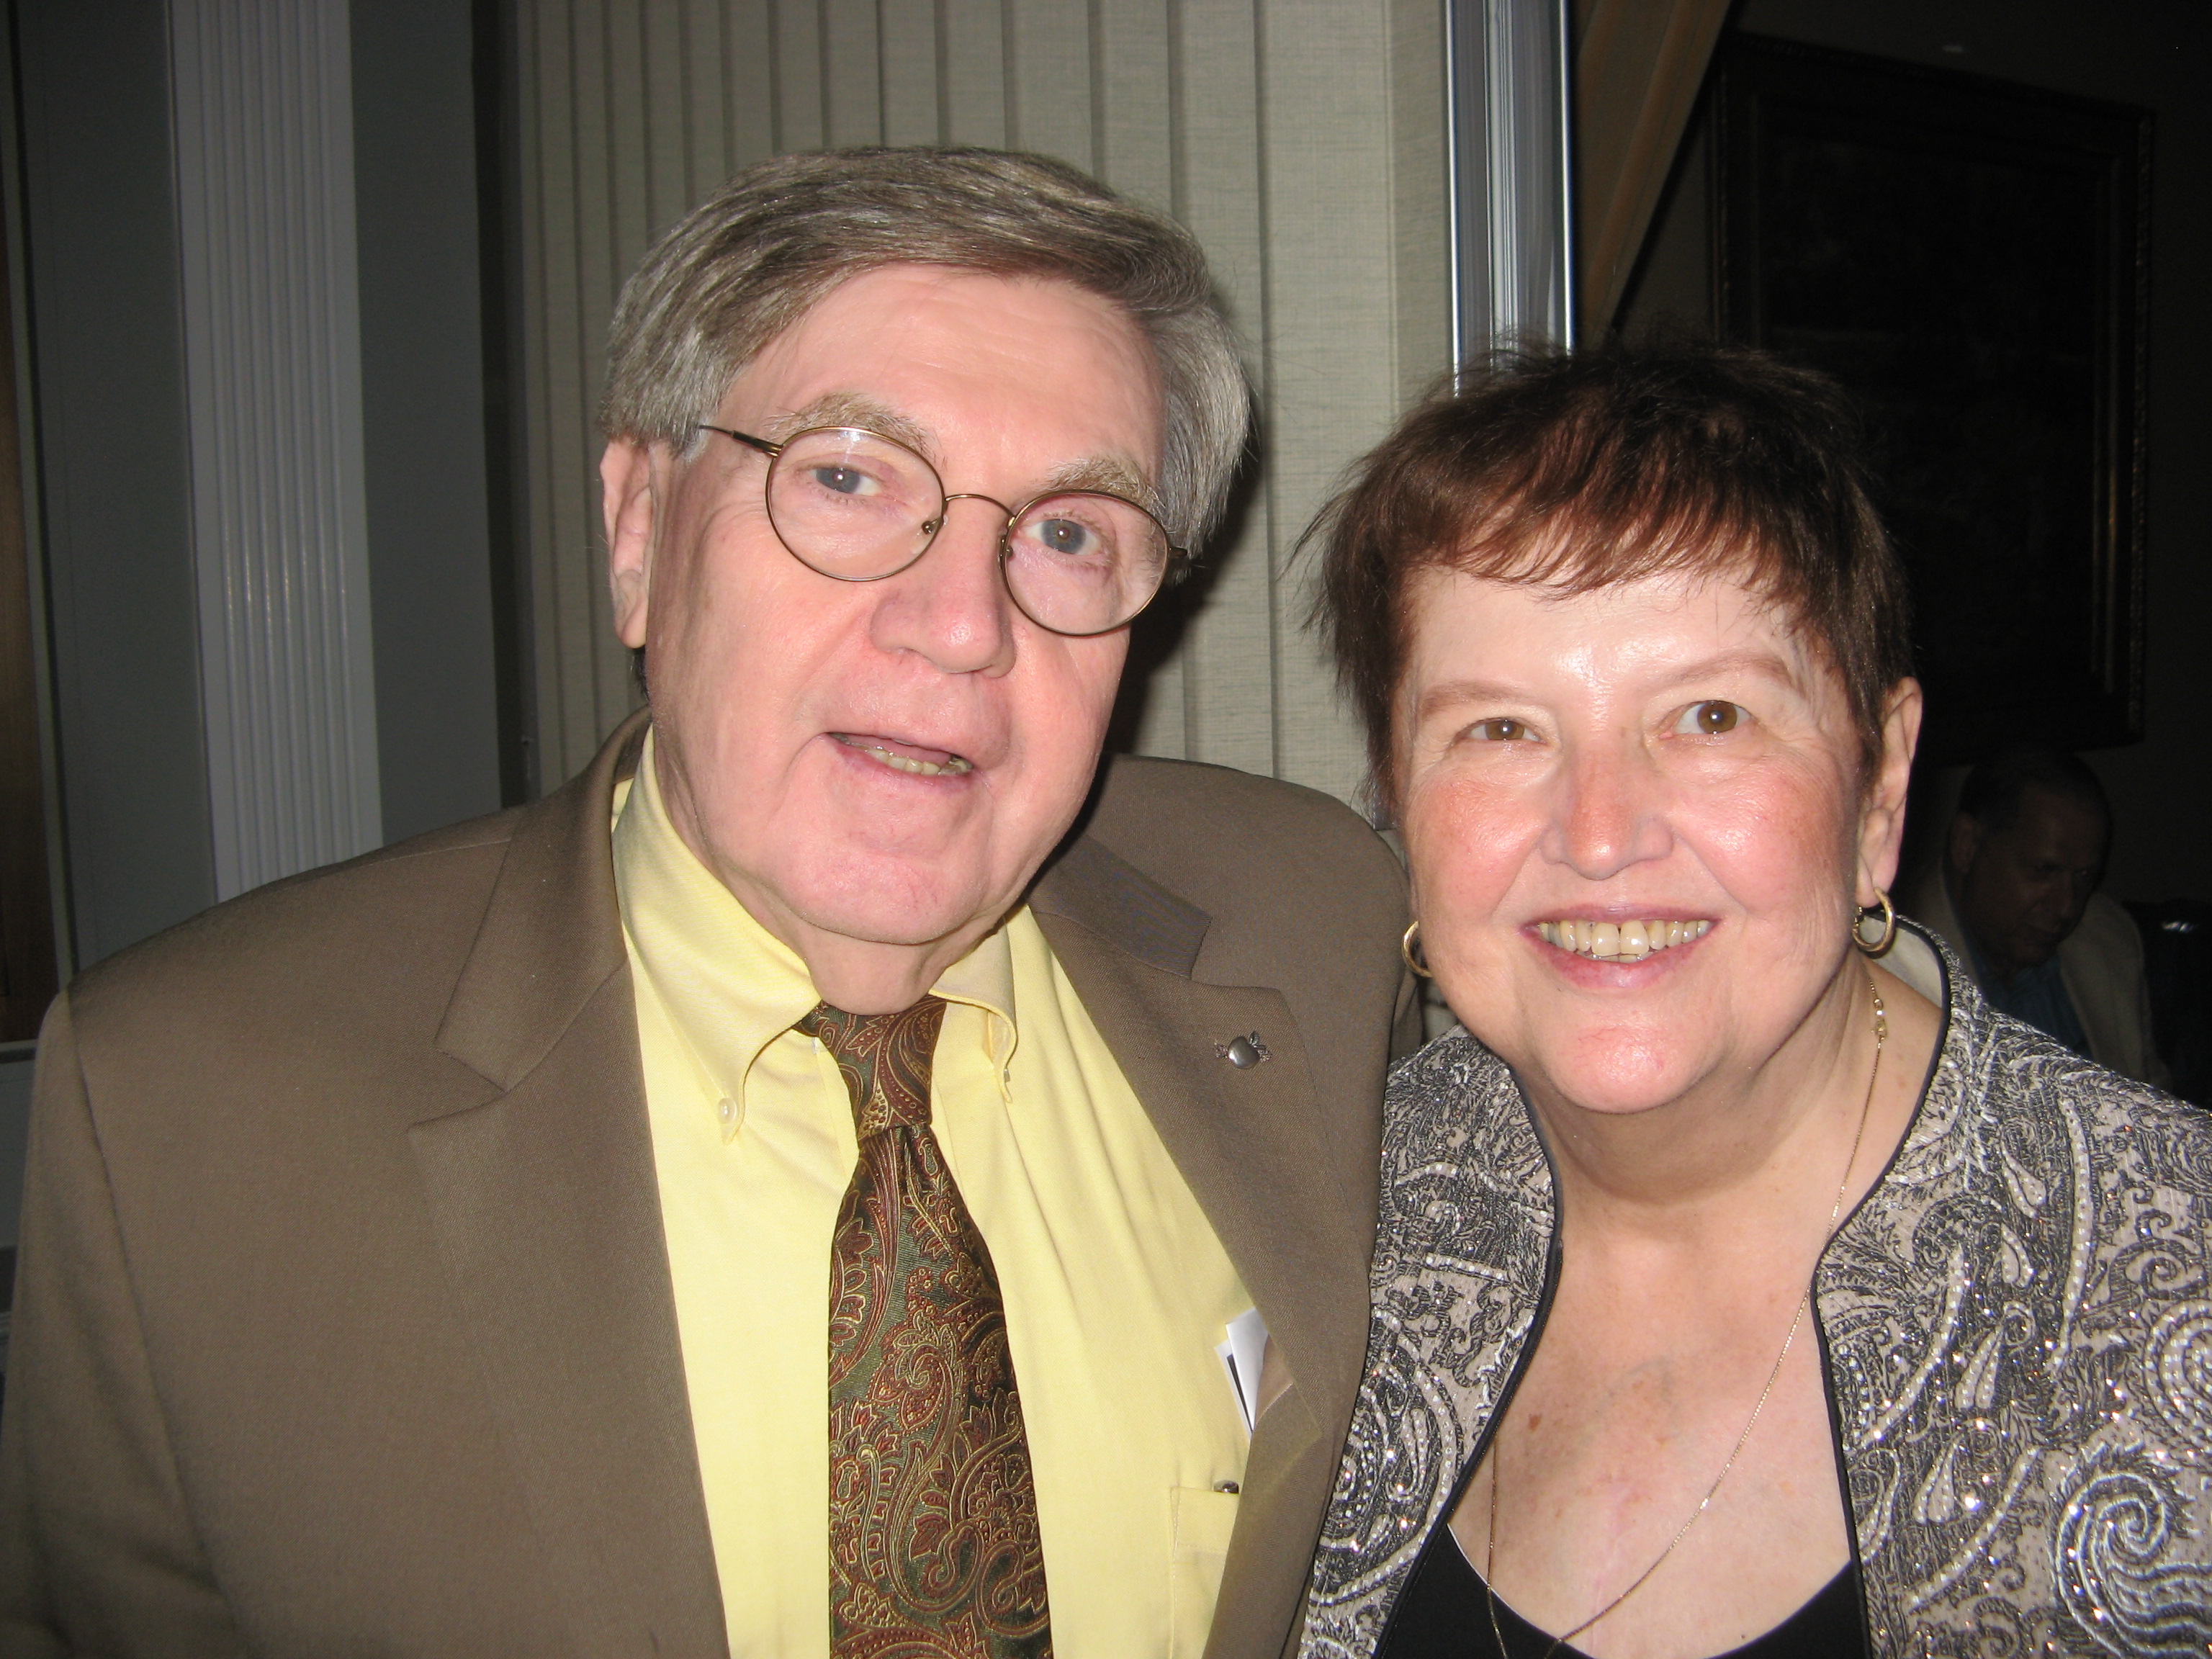 Andy McGowan with his wife Judy at the Yeats celebration. (Photo courtesy Wild Geese)